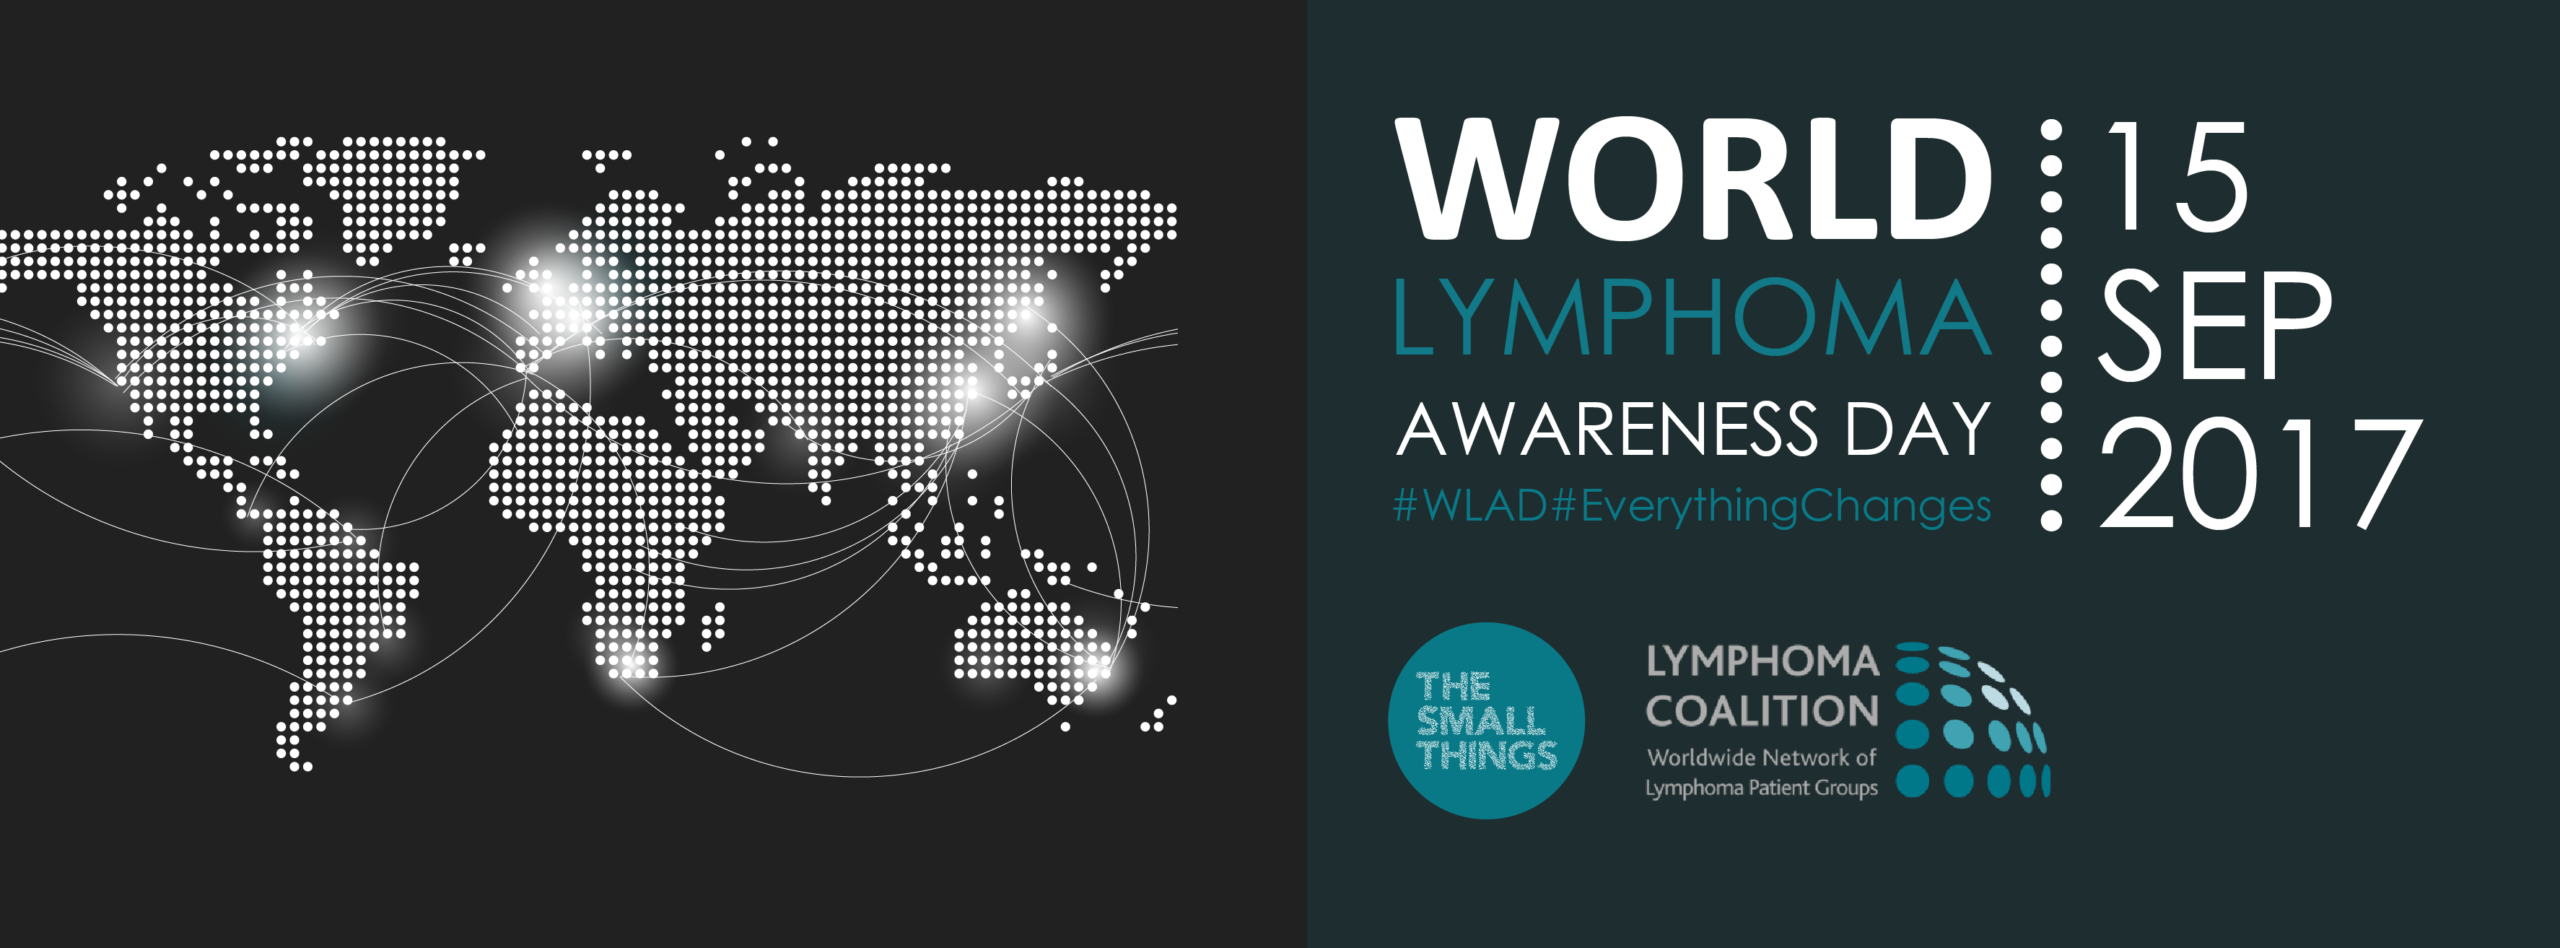 Count Down to World Lymphoma Awareness Day